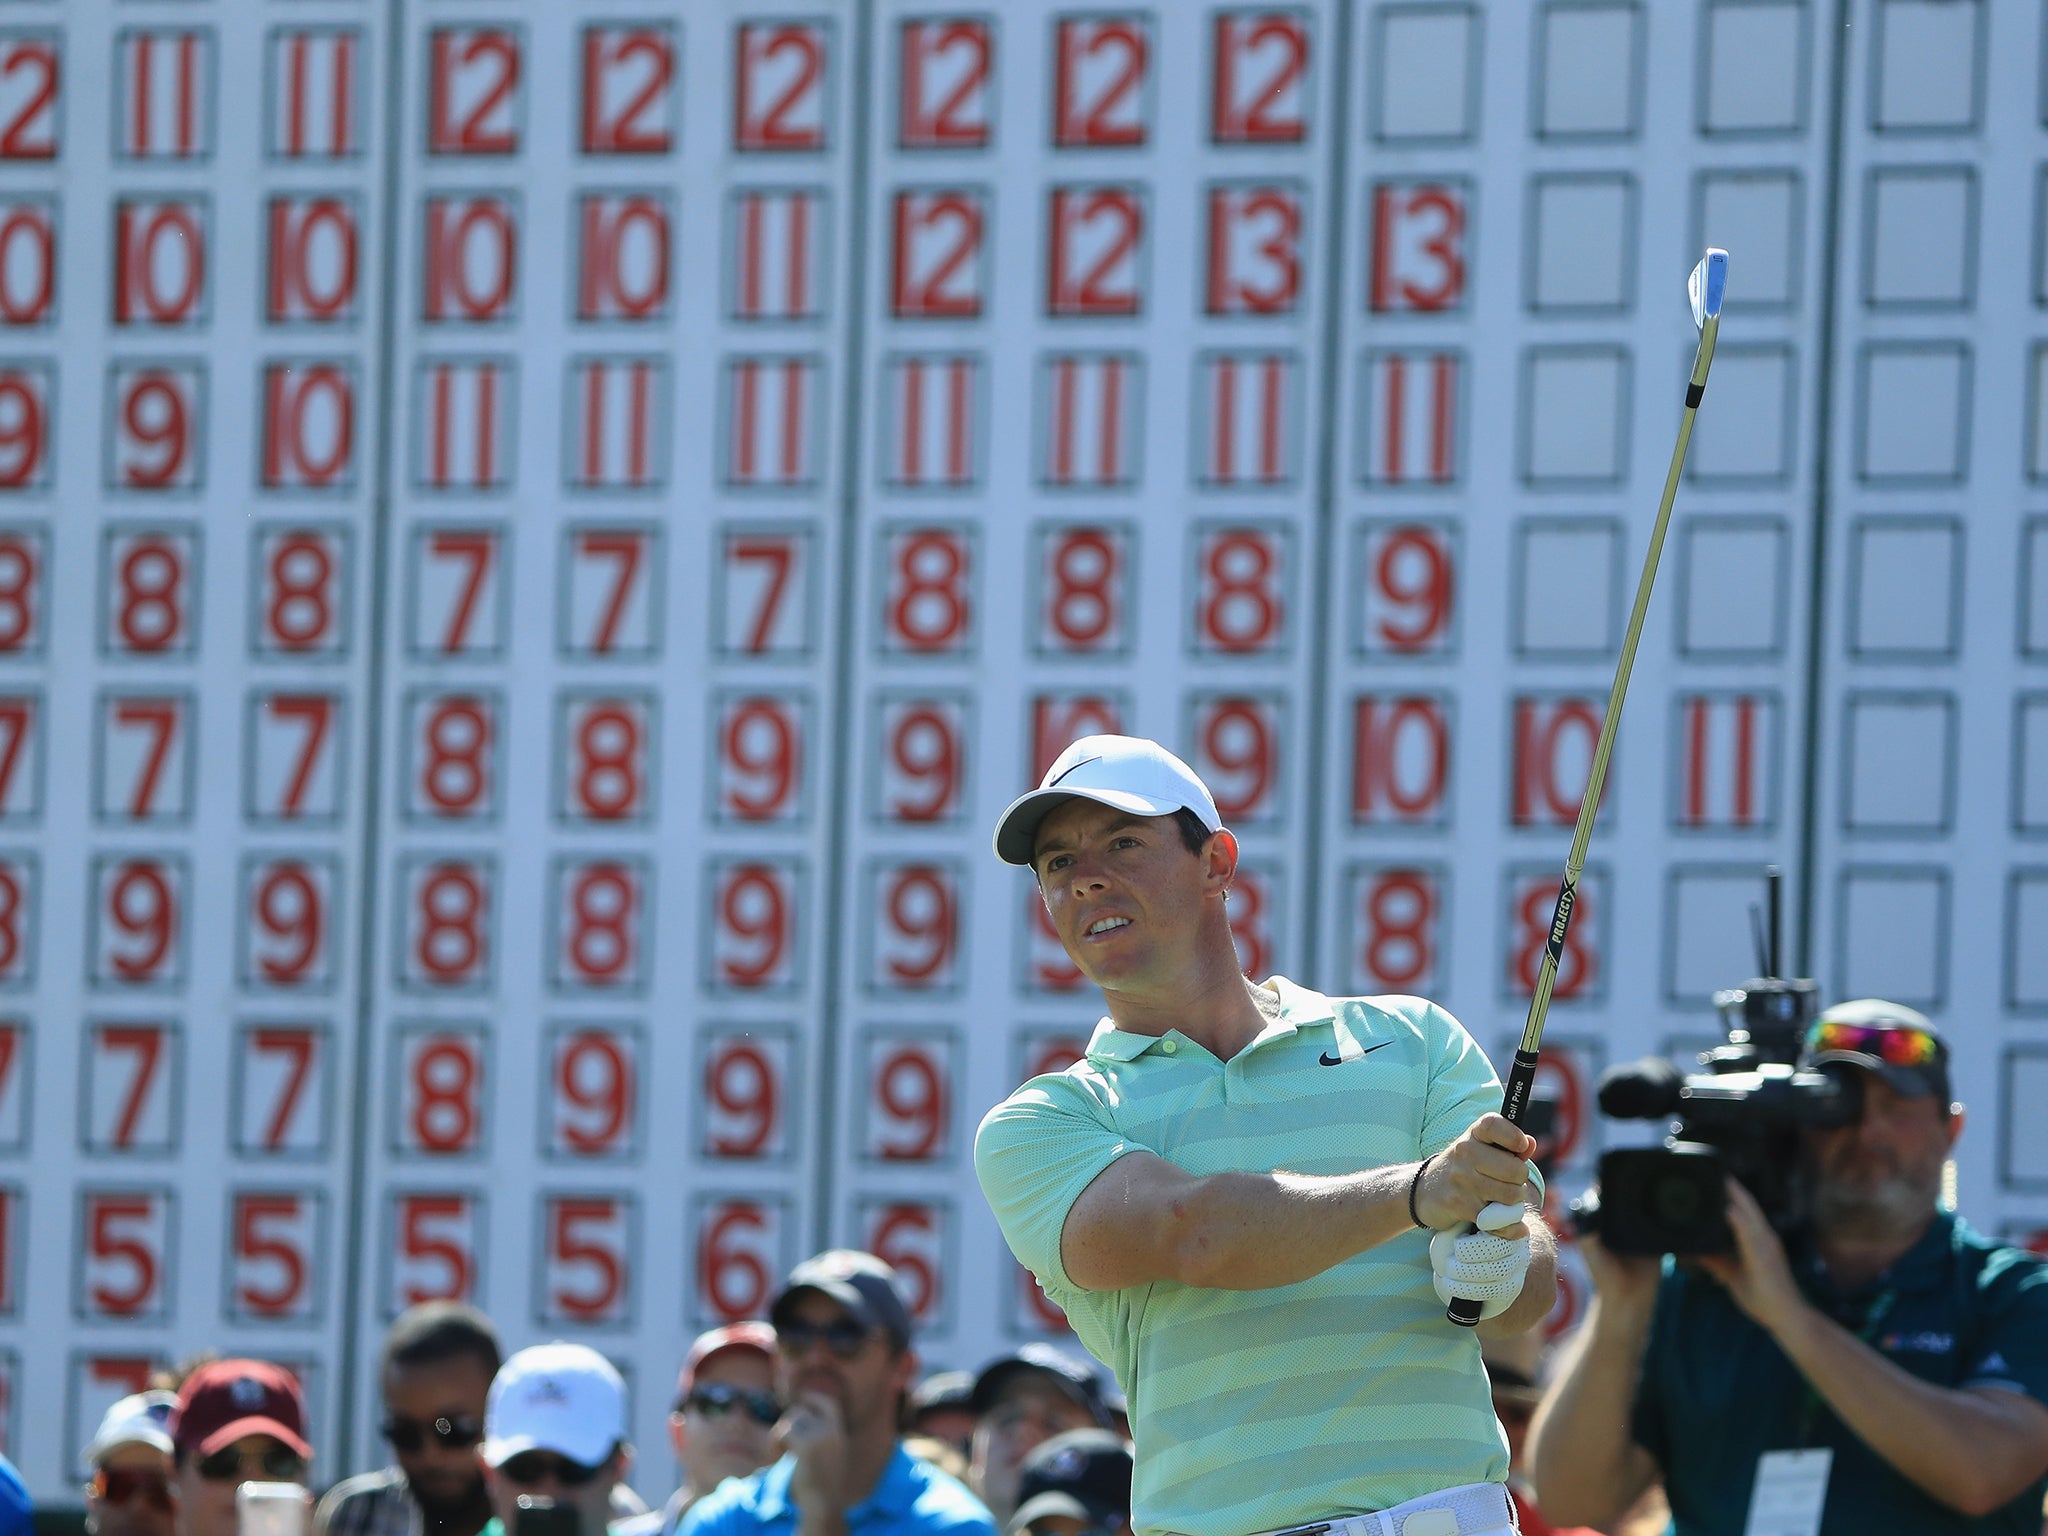 McIlroy produced five birdies on the final six holes to seal victory